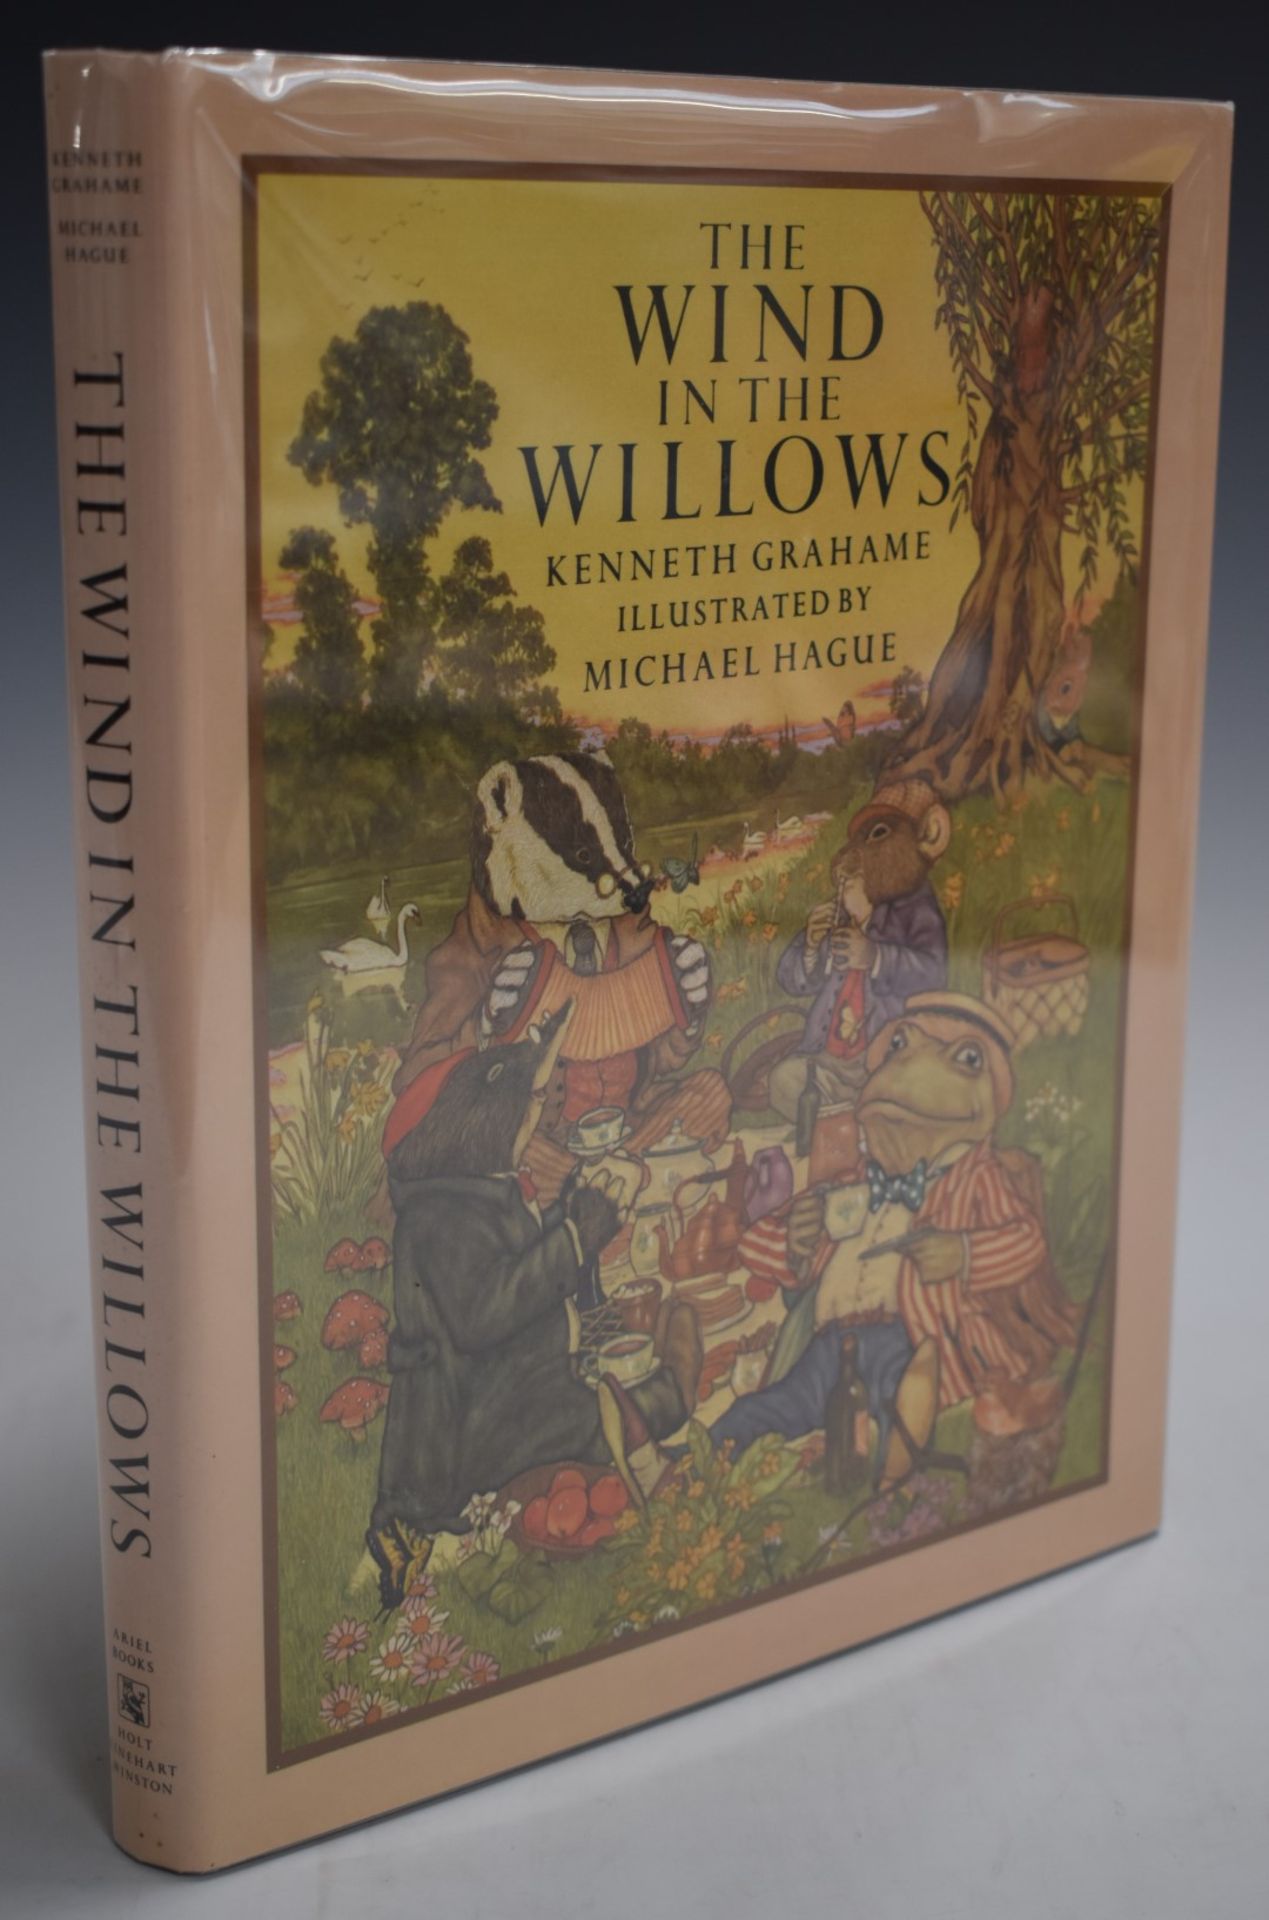 [Signed] The Wind In The Willows by Kenneth Grahame illustrated by Michael Hague, published Ariel